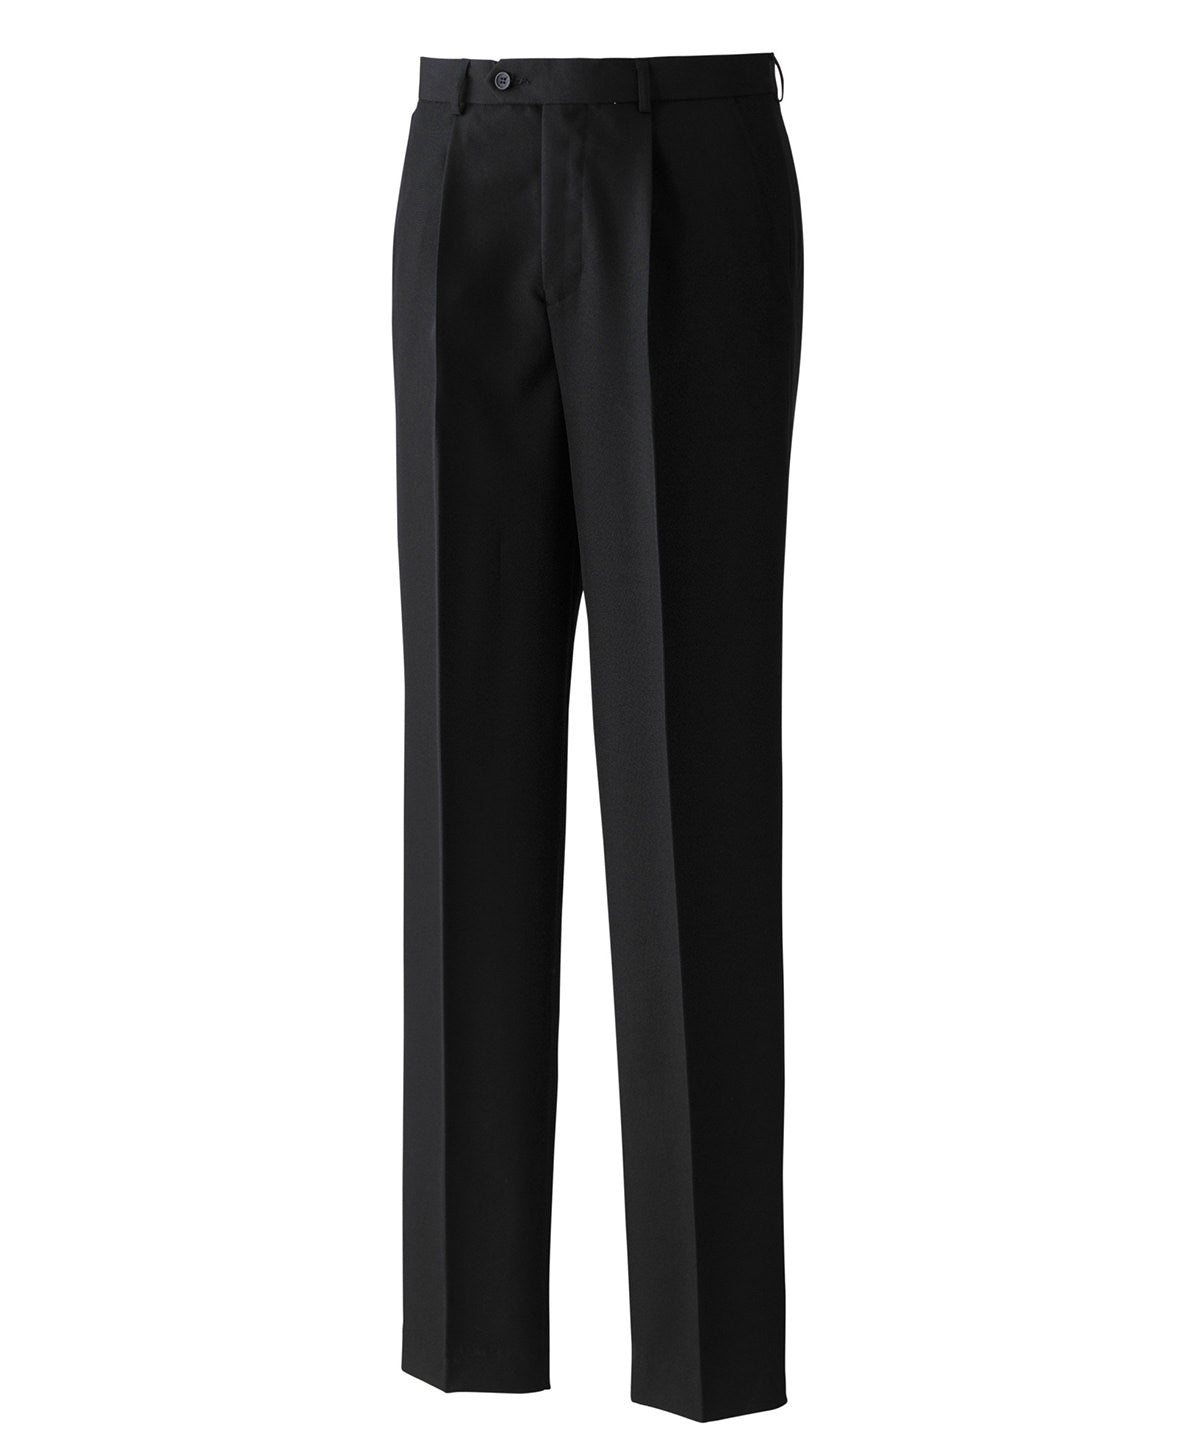 Premier Polyester Trousers - 24 Workwear - Trousers